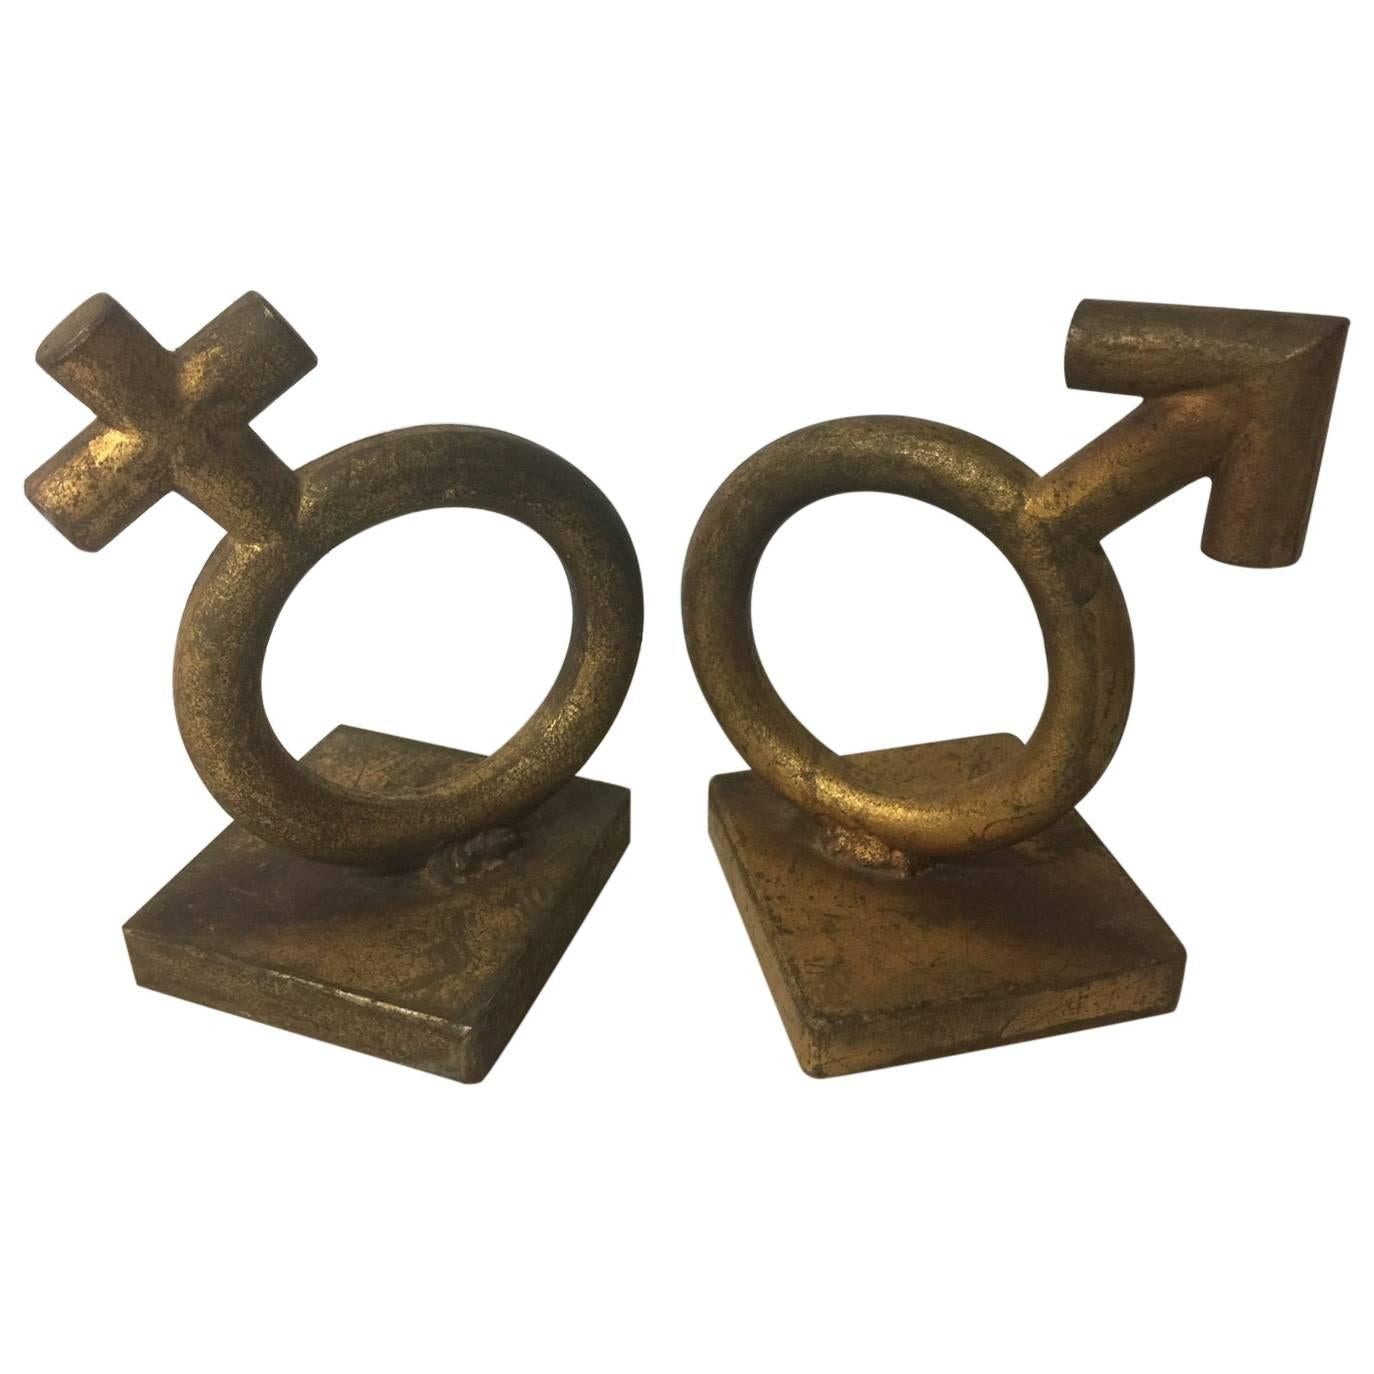 Iconic Midcentury Gender Symbol / Sex Bookends by C. Jere